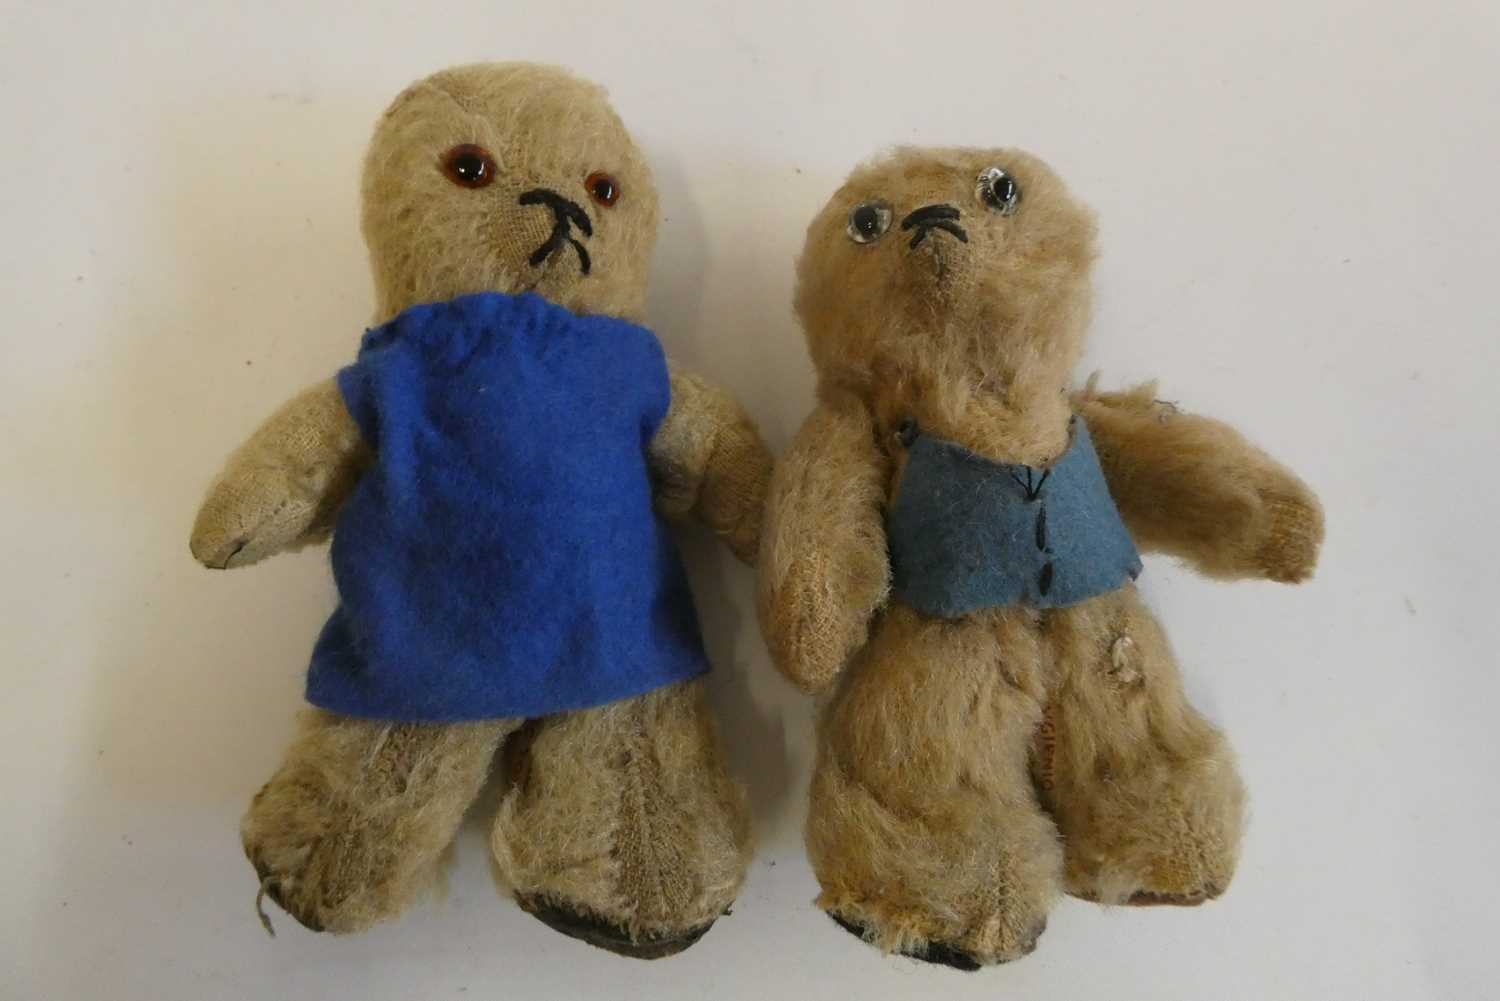 Rare Chad Valley "Three bears" mother and father teddies, both with glass eyes, felt clothing and